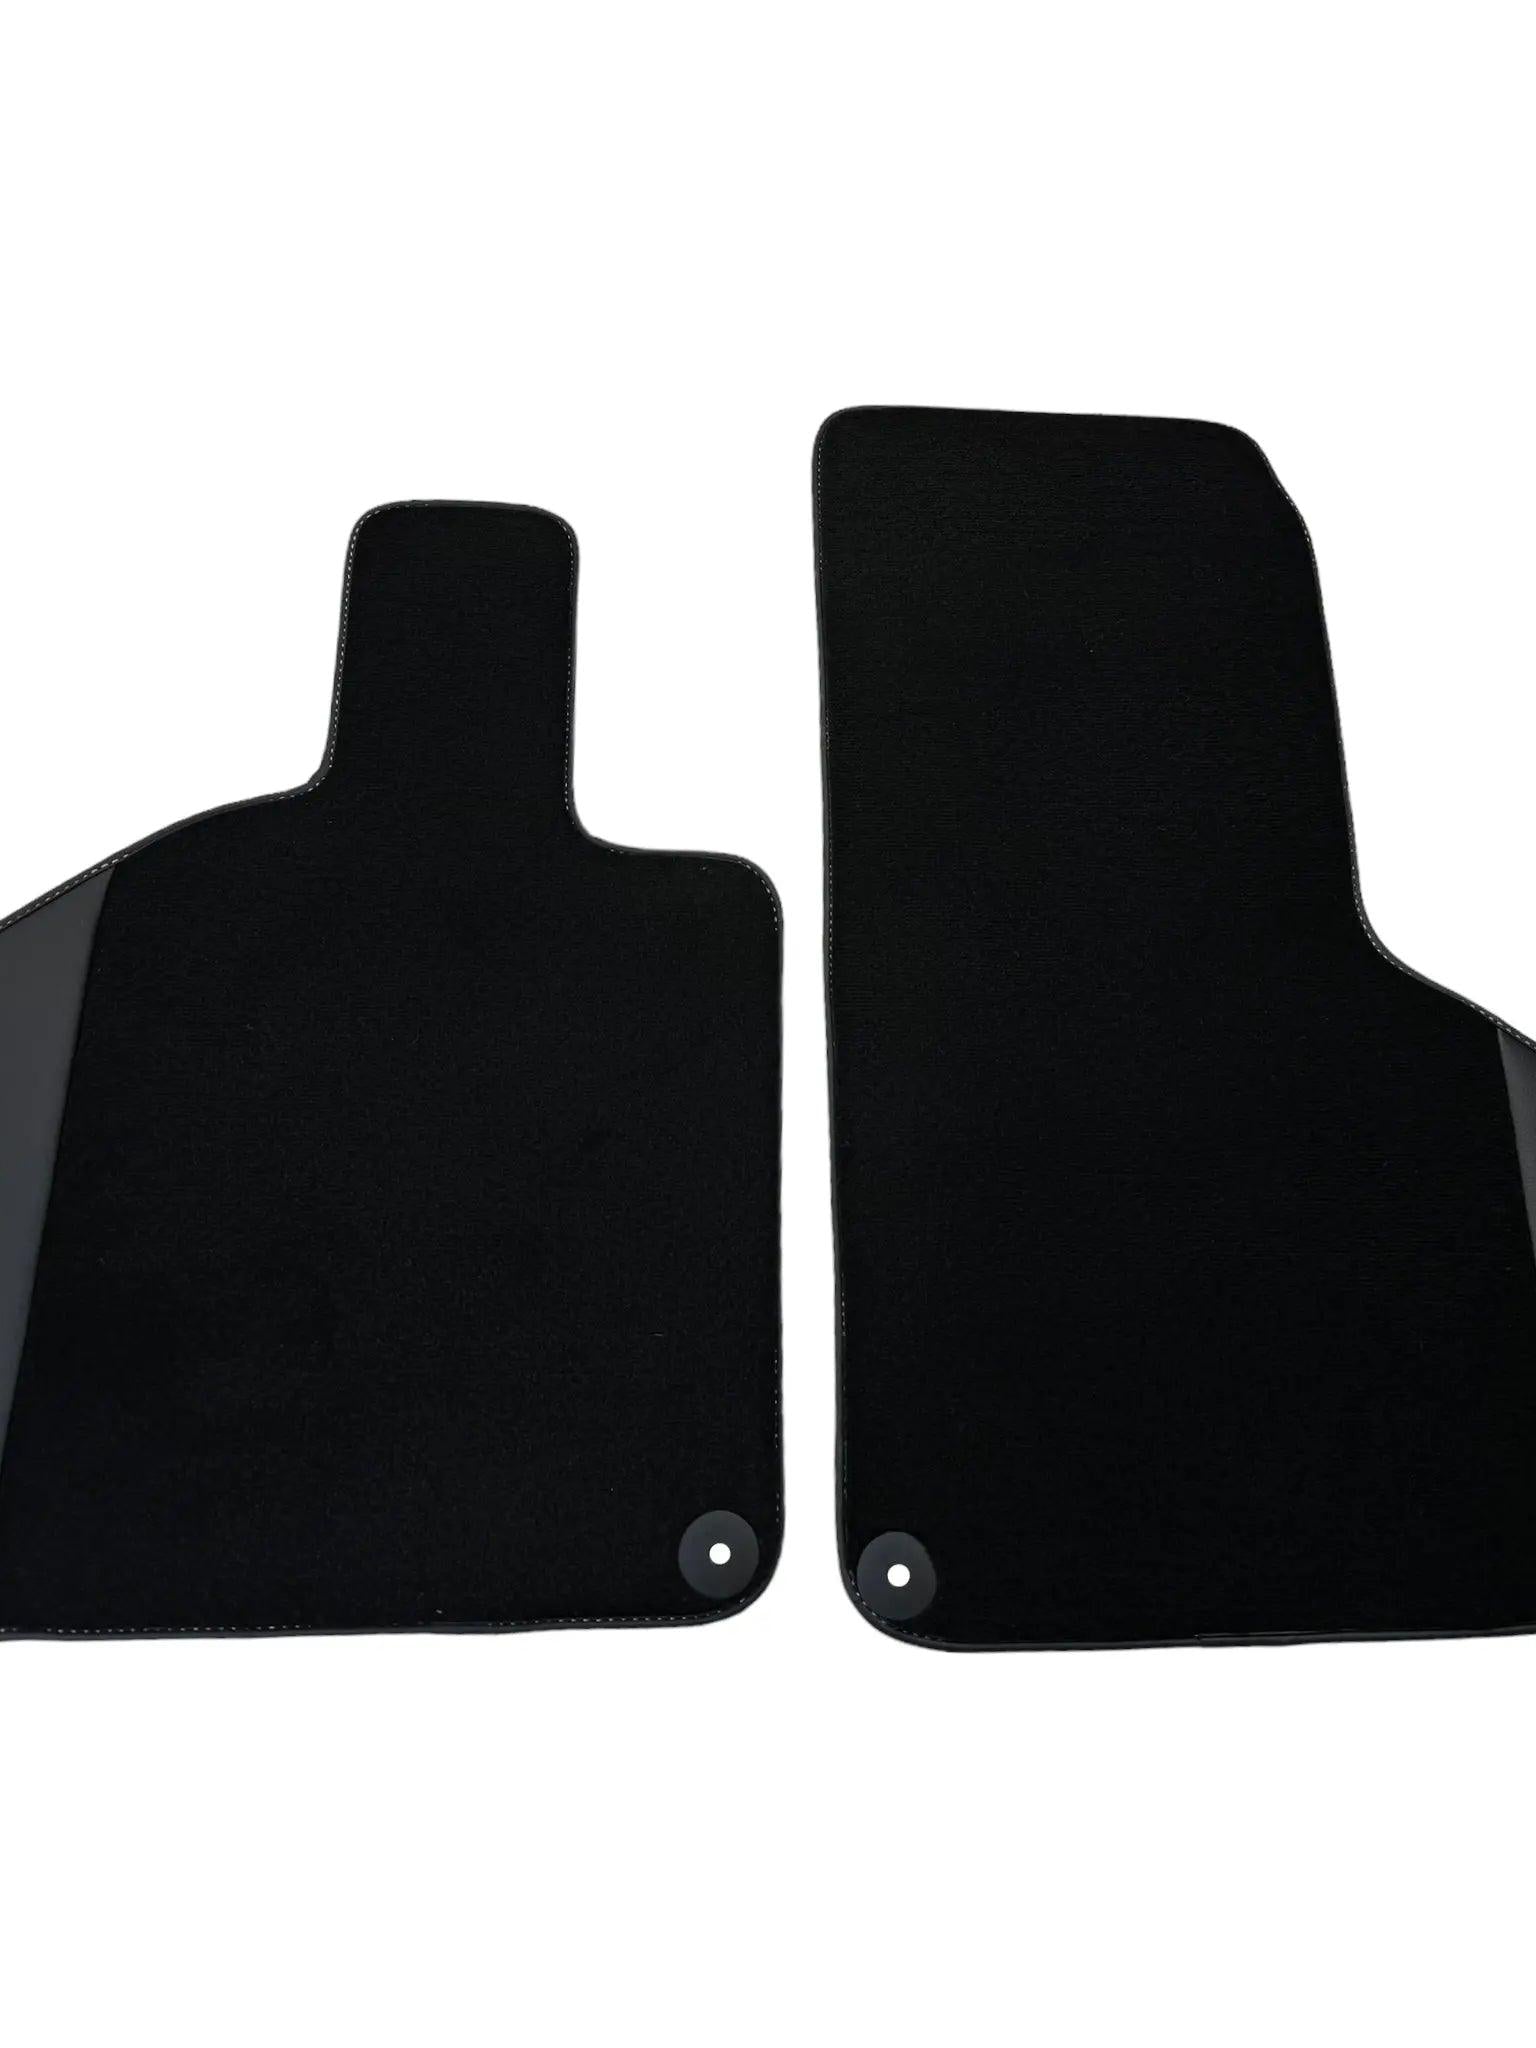 Black Floor Mats with Leather for Lamborghini Huracan (2014-2023) - Fighter Jet Edition